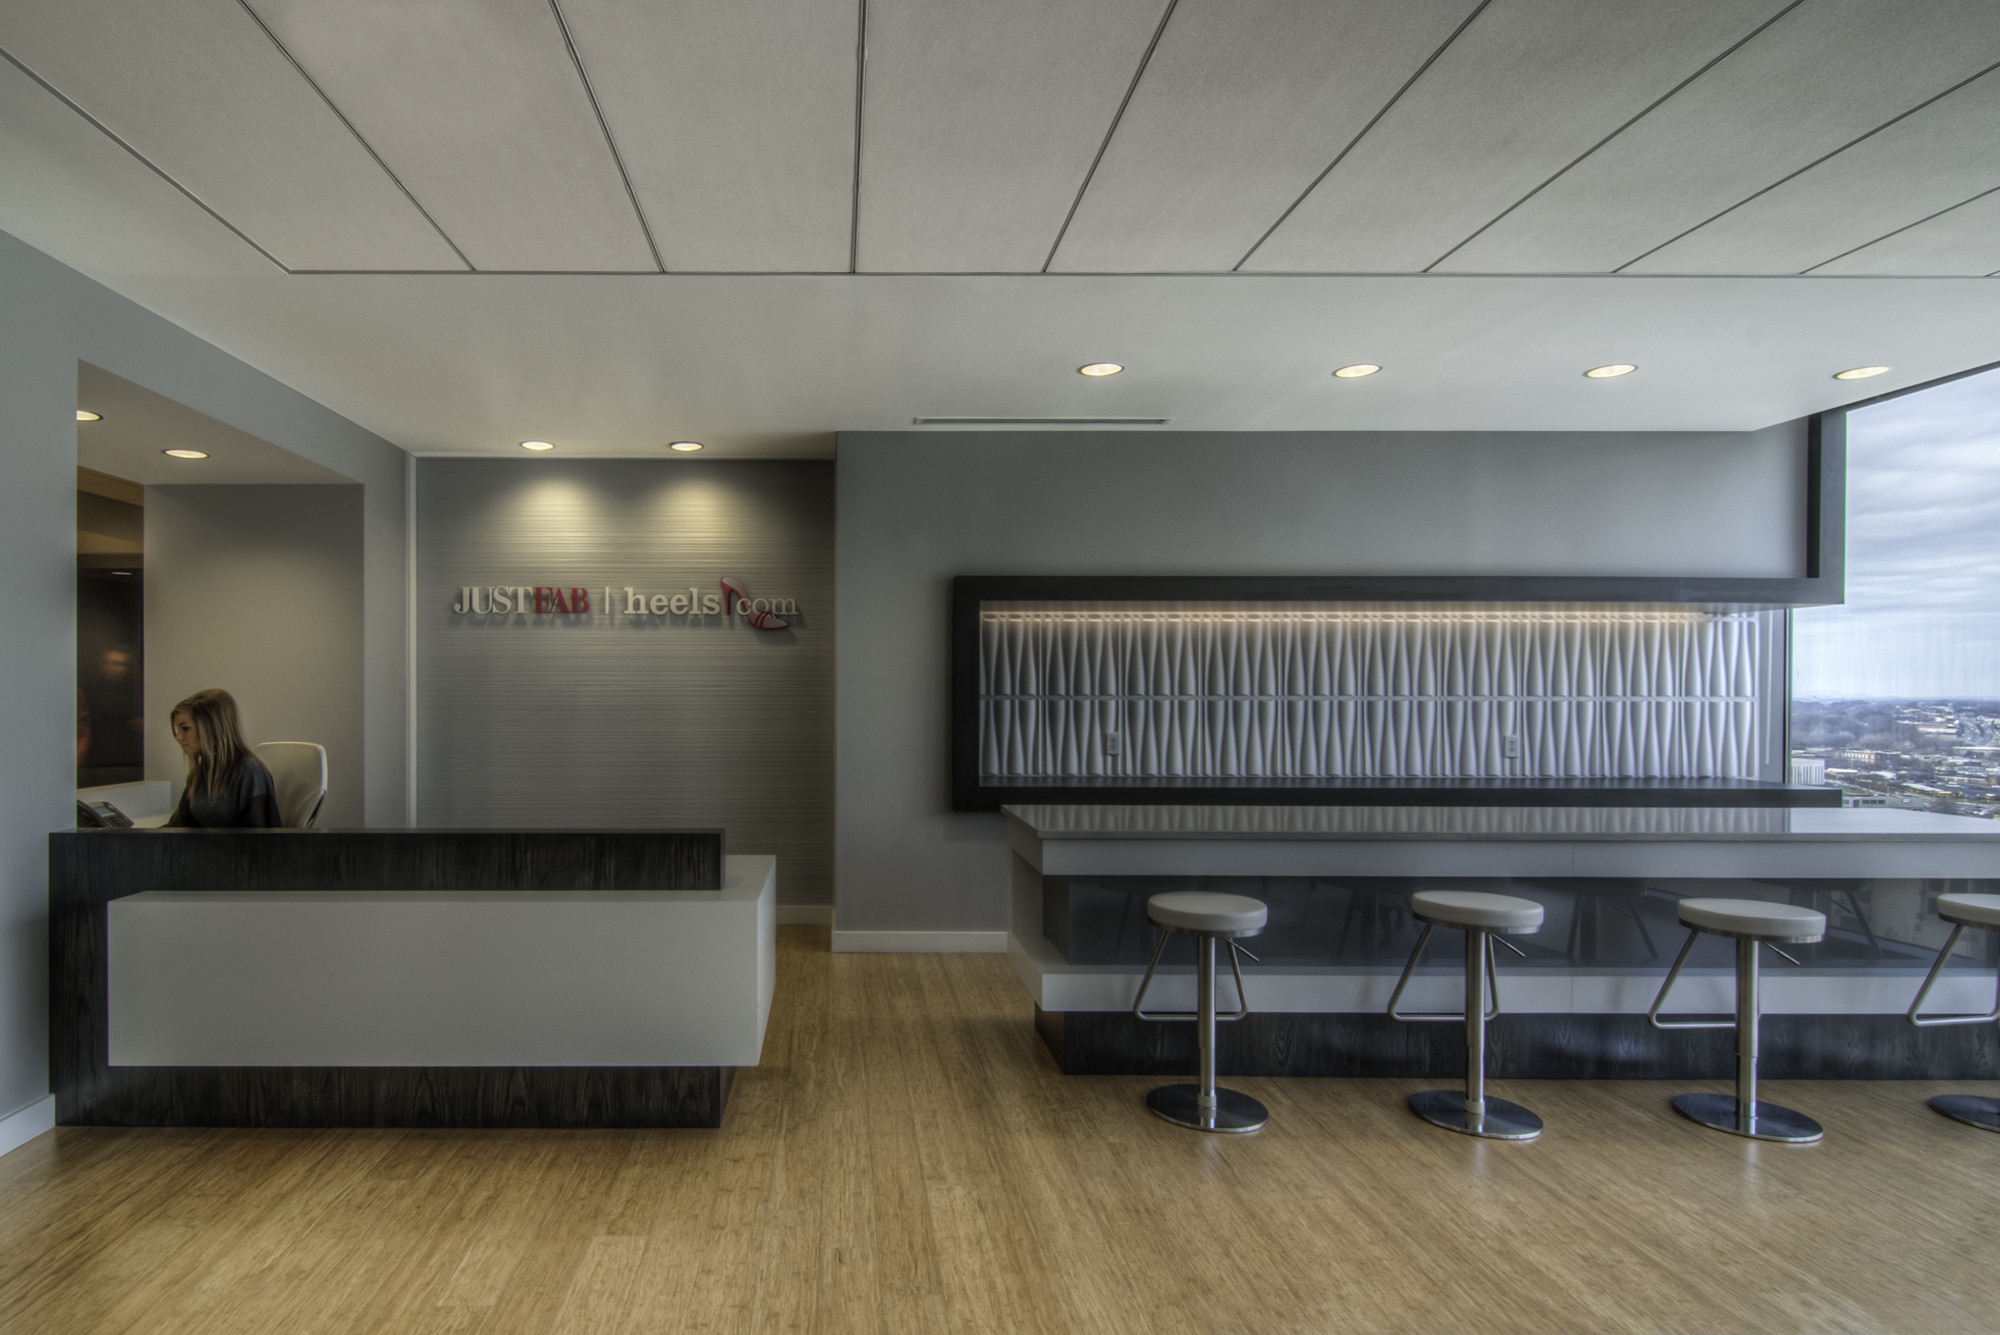 A modern office with a reception area and bar stools.